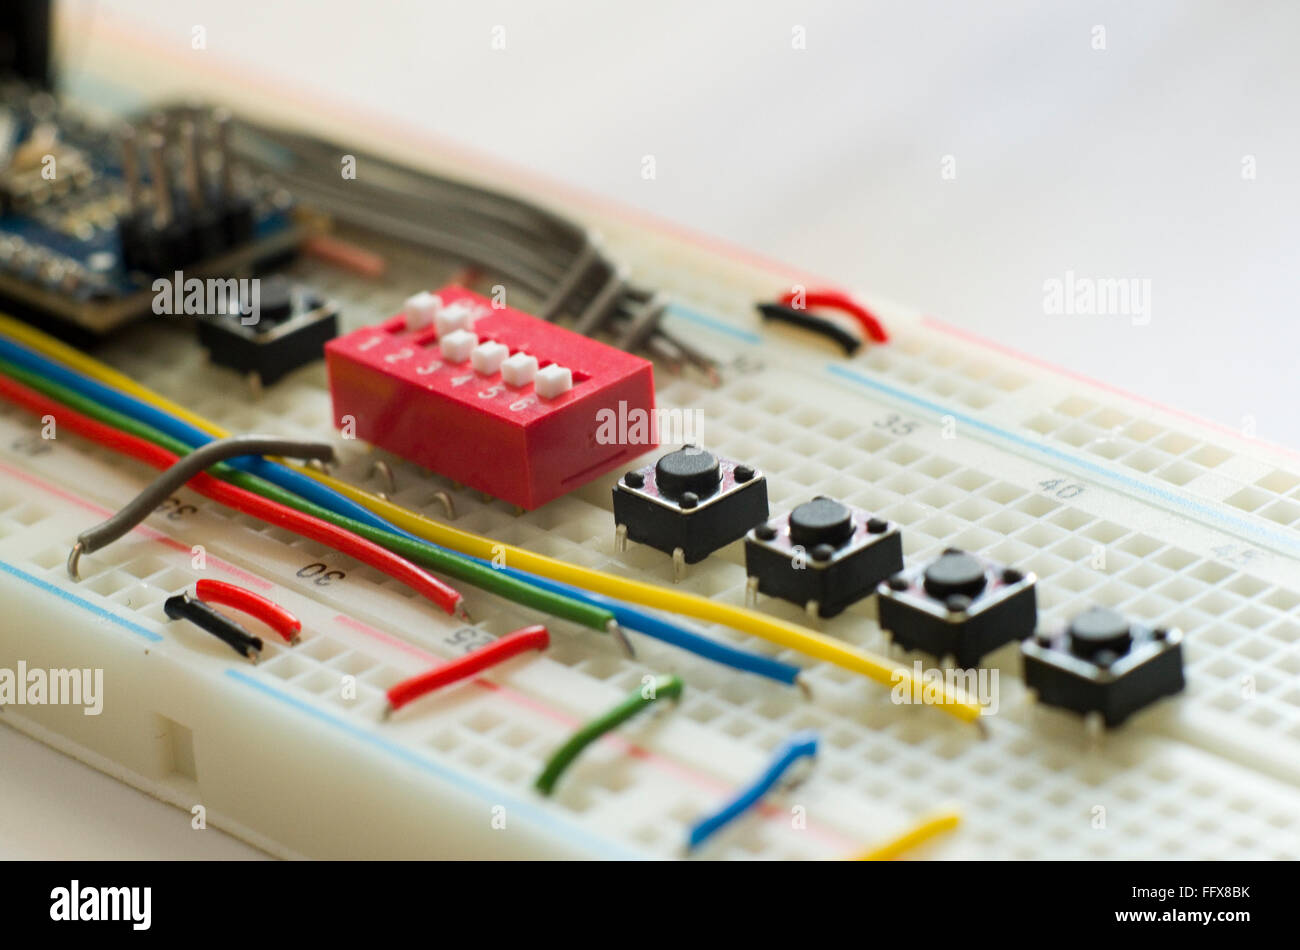 Electronics prototyping board (breadboard) with an assortment of switches and wires. Stock Photo